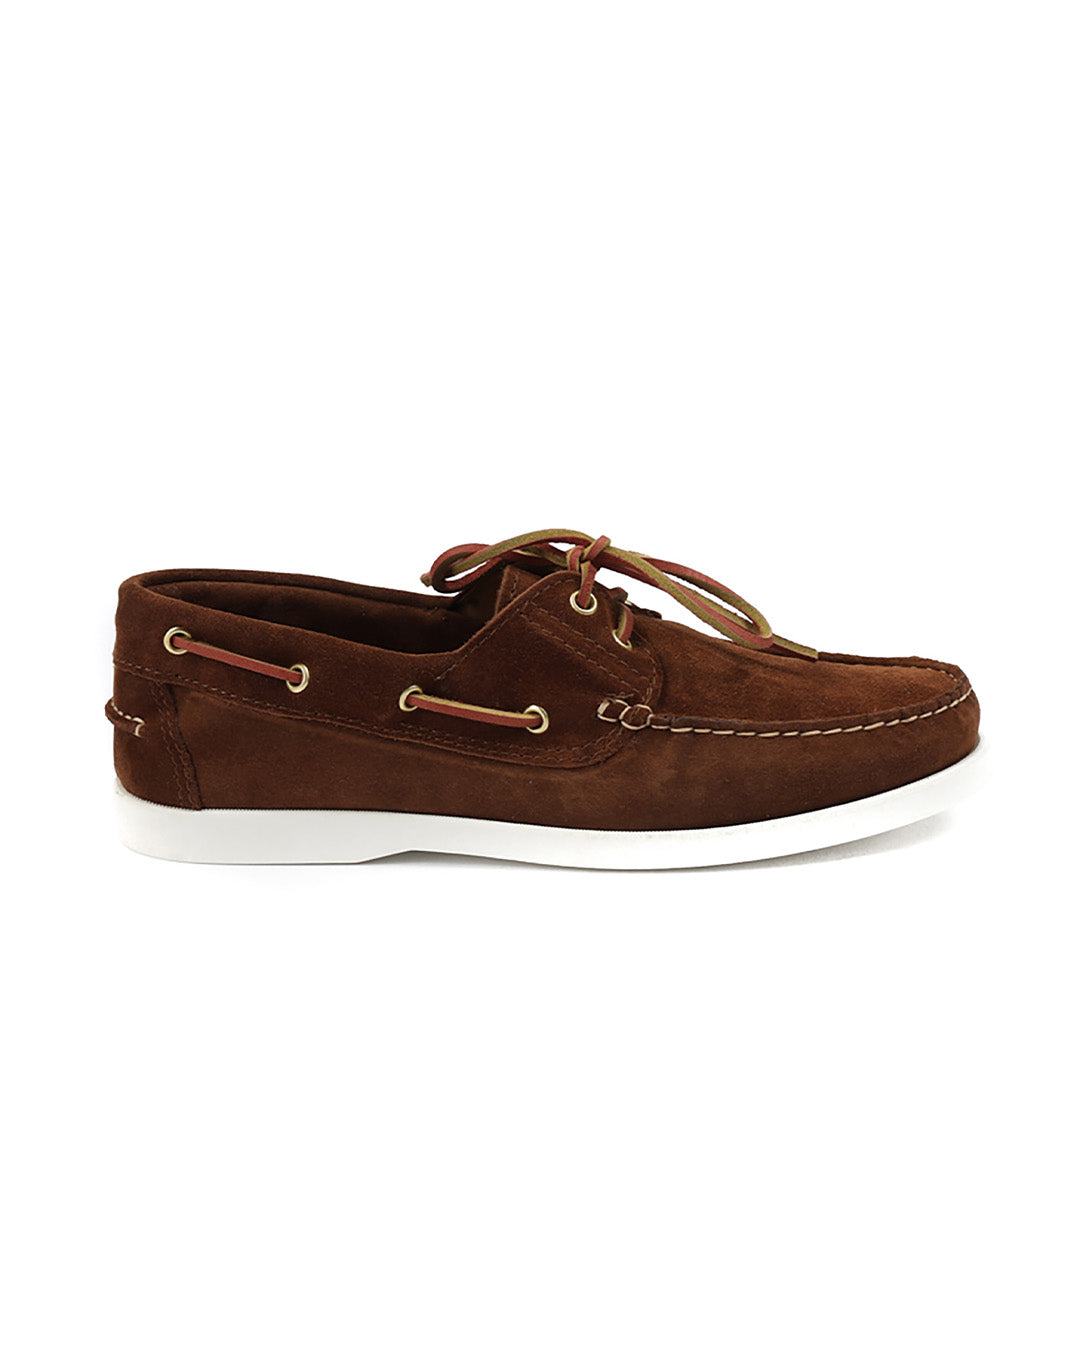 Jimmy - suede tobacco boat